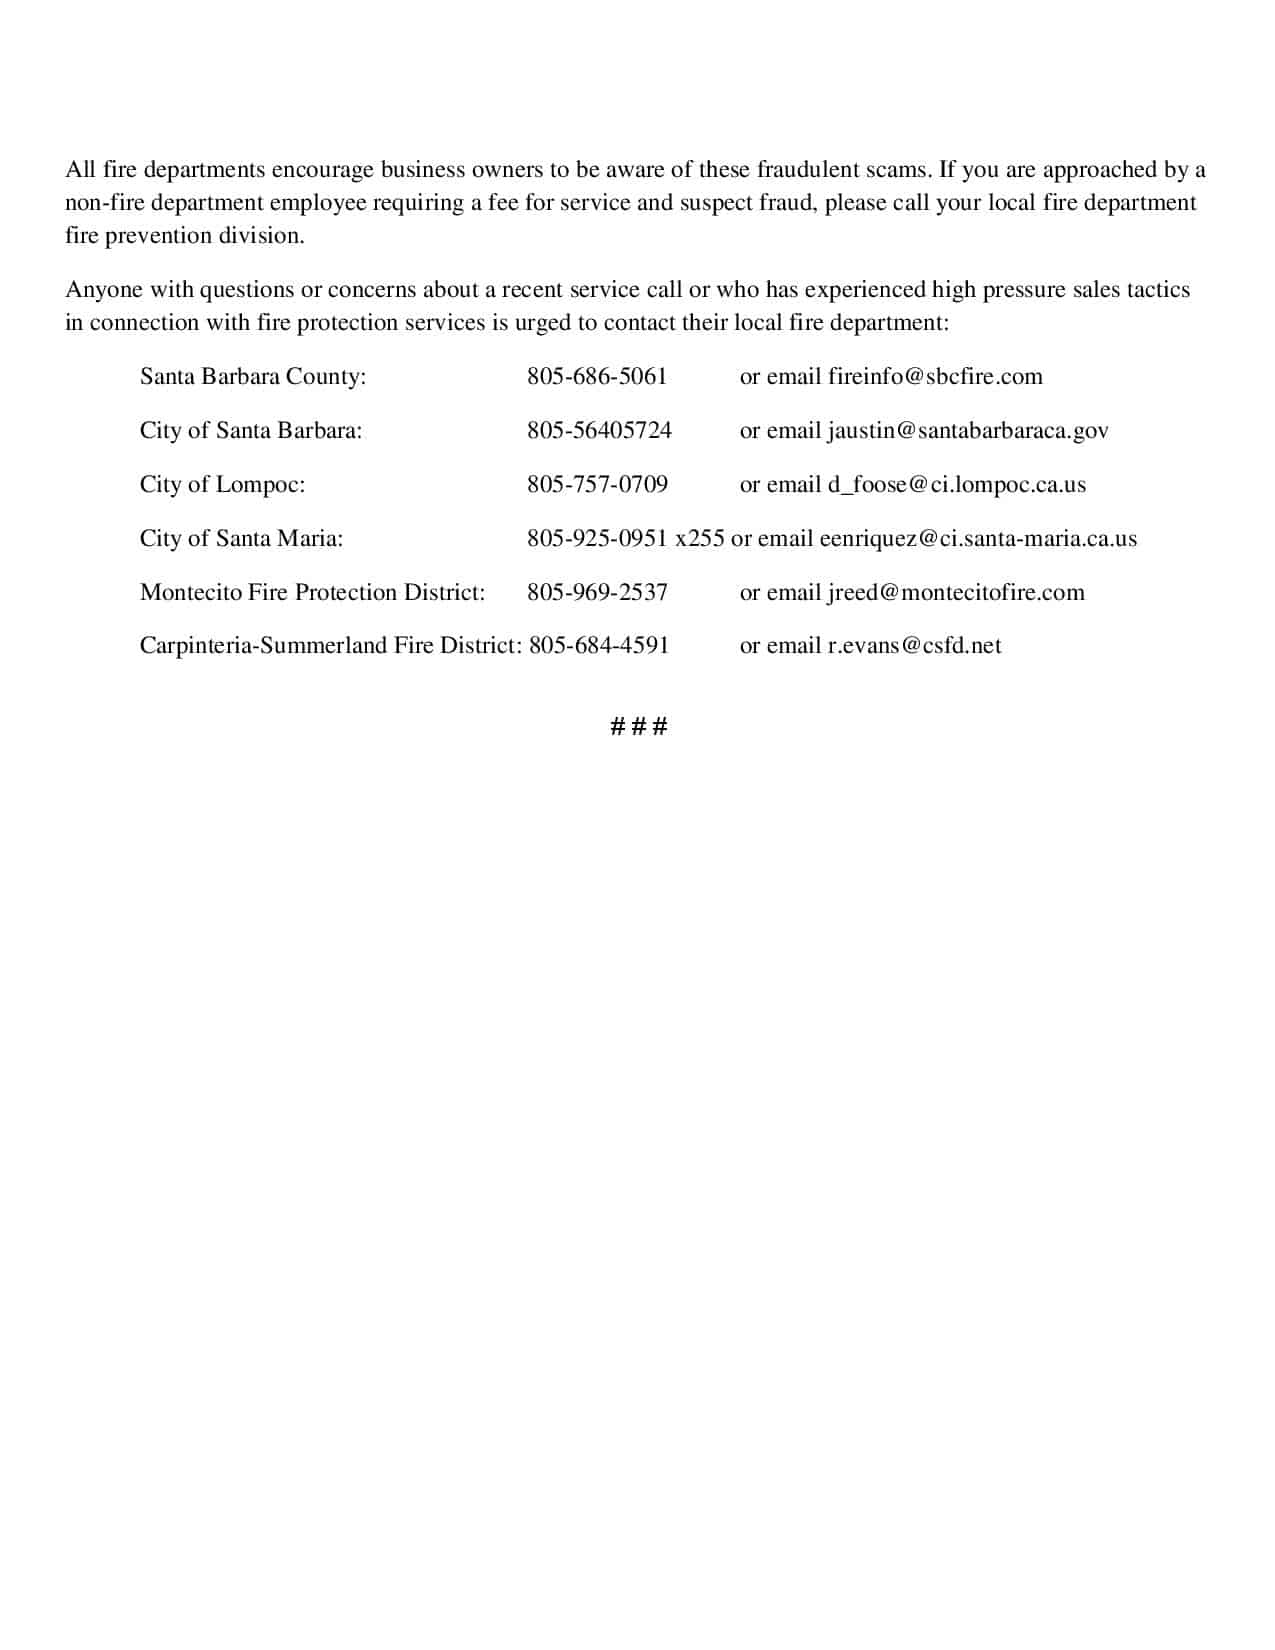 Fraudulent Fire Inspections Page 2